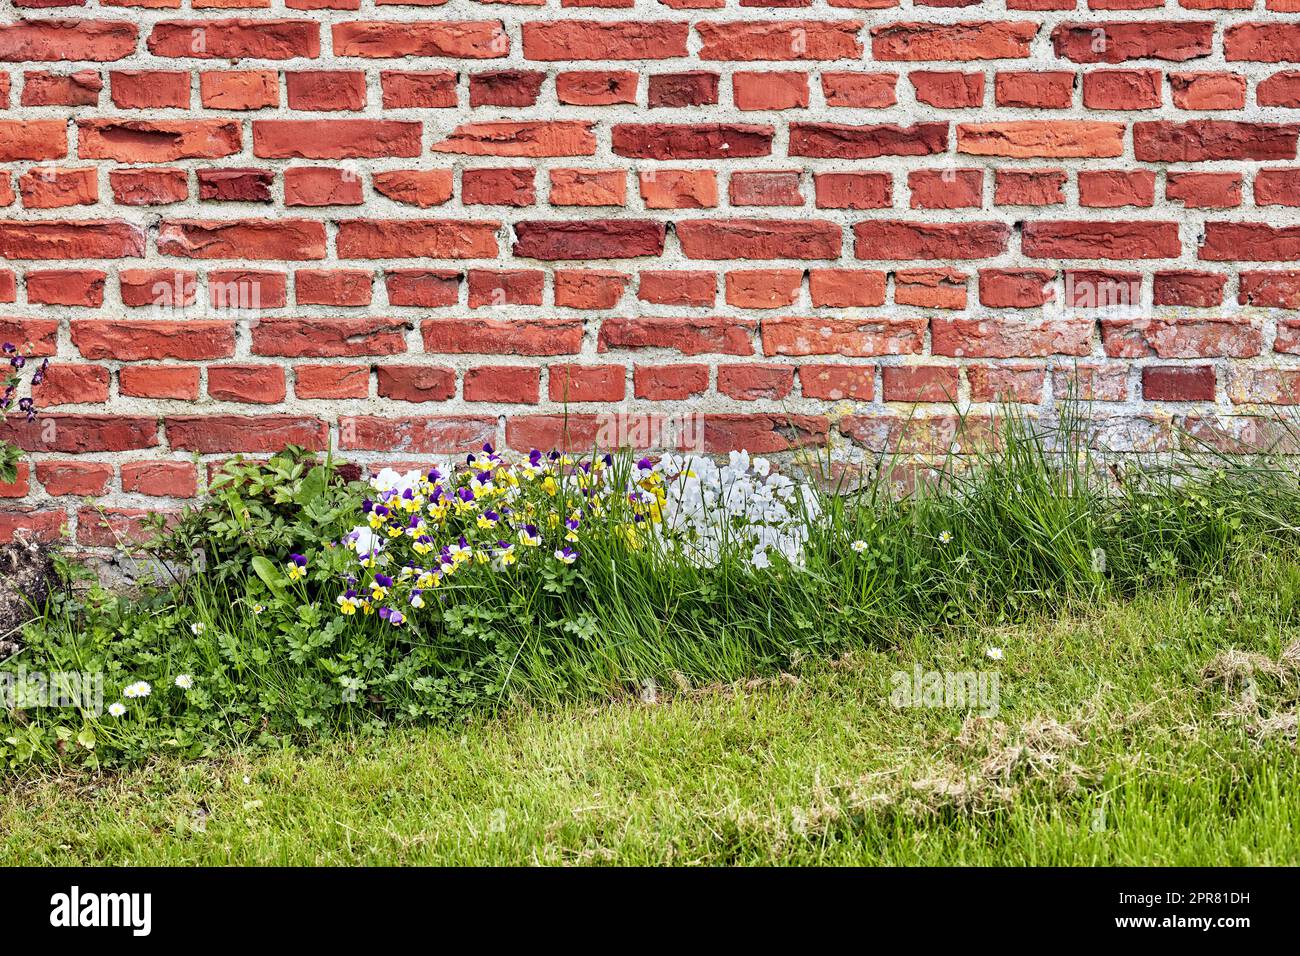 A close up of a wall of red bricks on an old building with lush green grass and wild daisies growing during spring. Hard rough surface with cement plaster attached to a concrete weathered structure Stock Photo